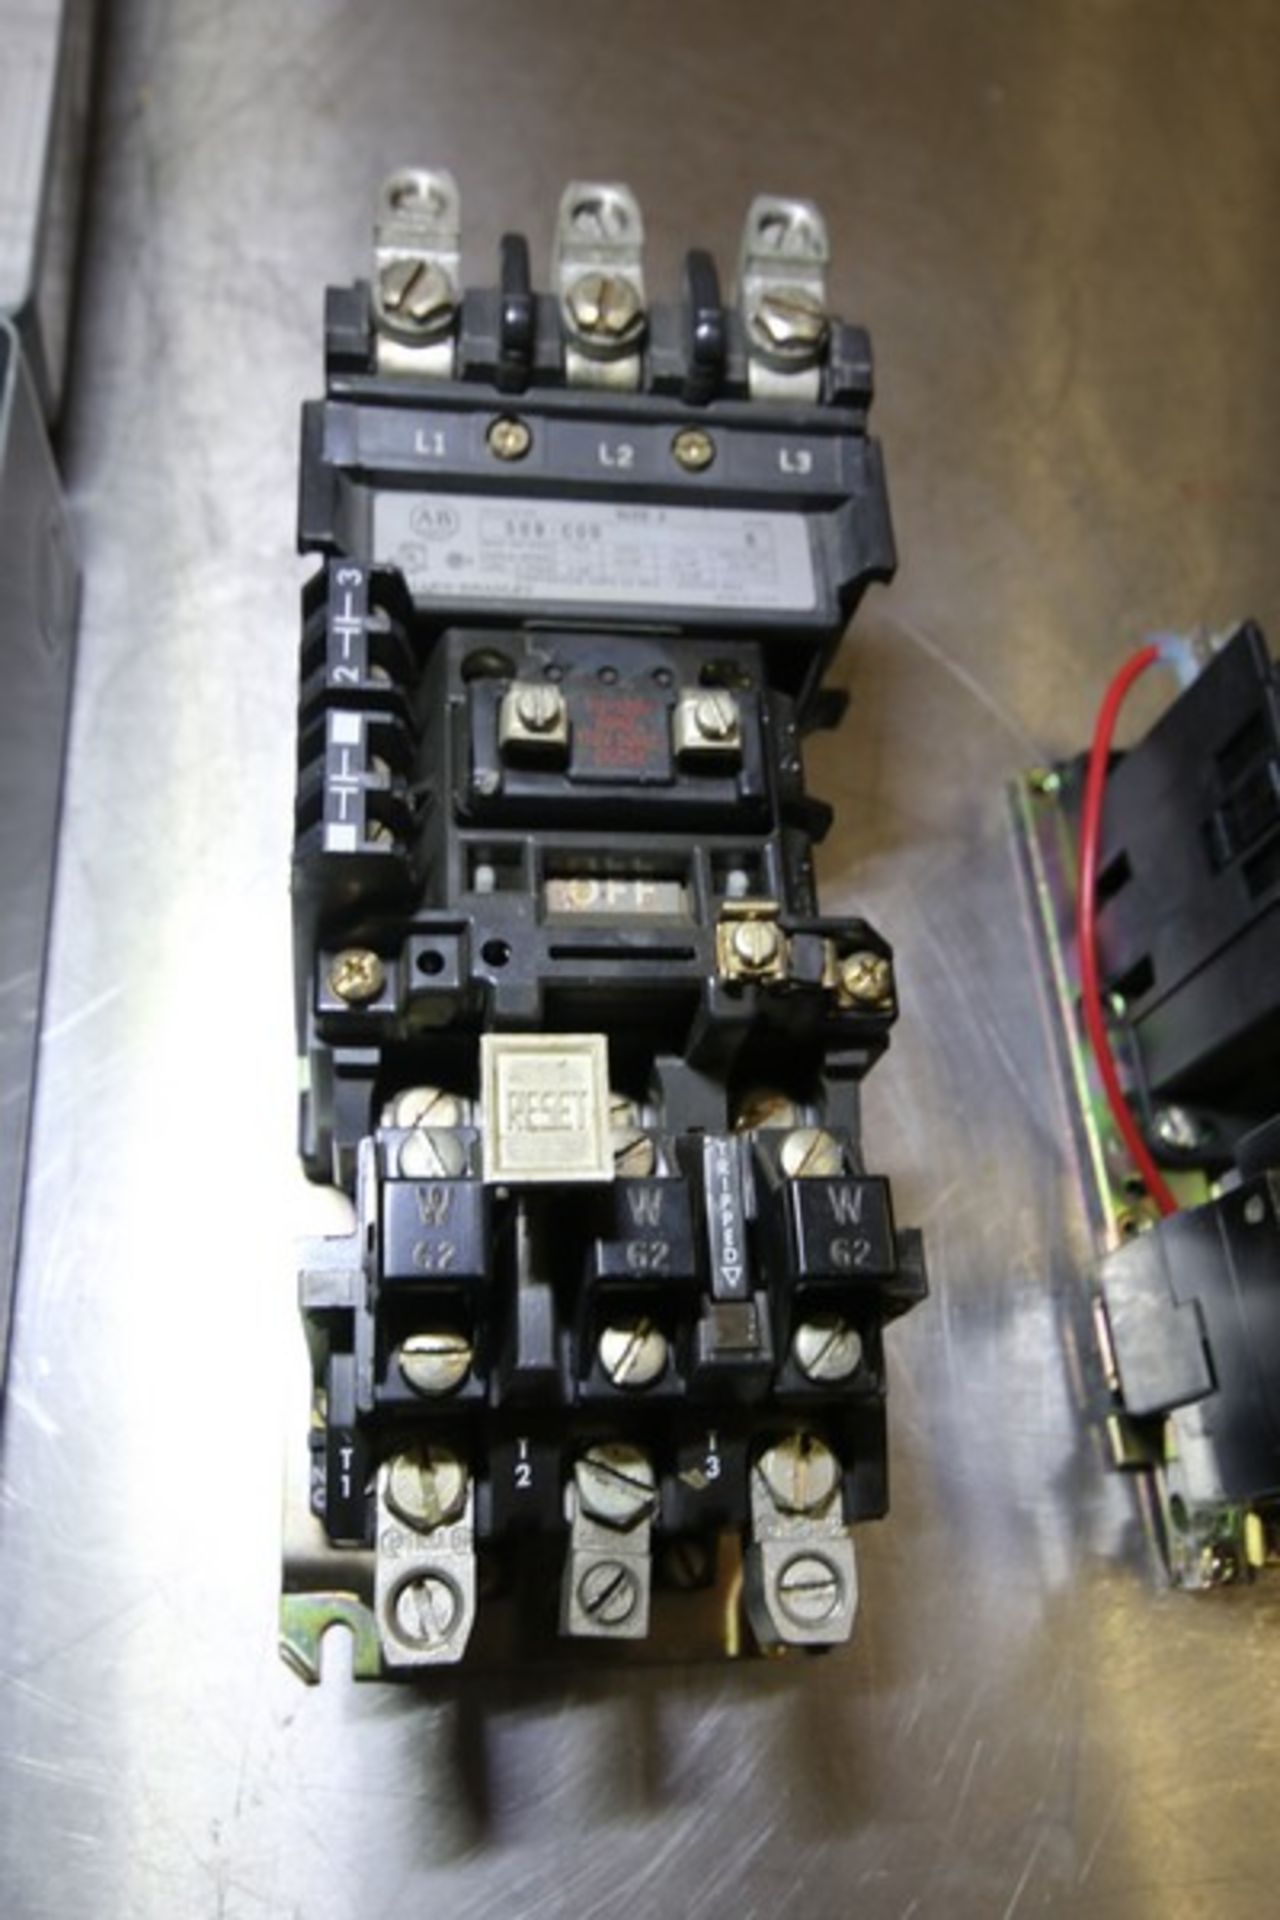 Lot of (3) Starters Including Allen Bradley Size 1 - 509-COD Series B - 10 to 25 hp, (1) Square D - Image 4 of 7